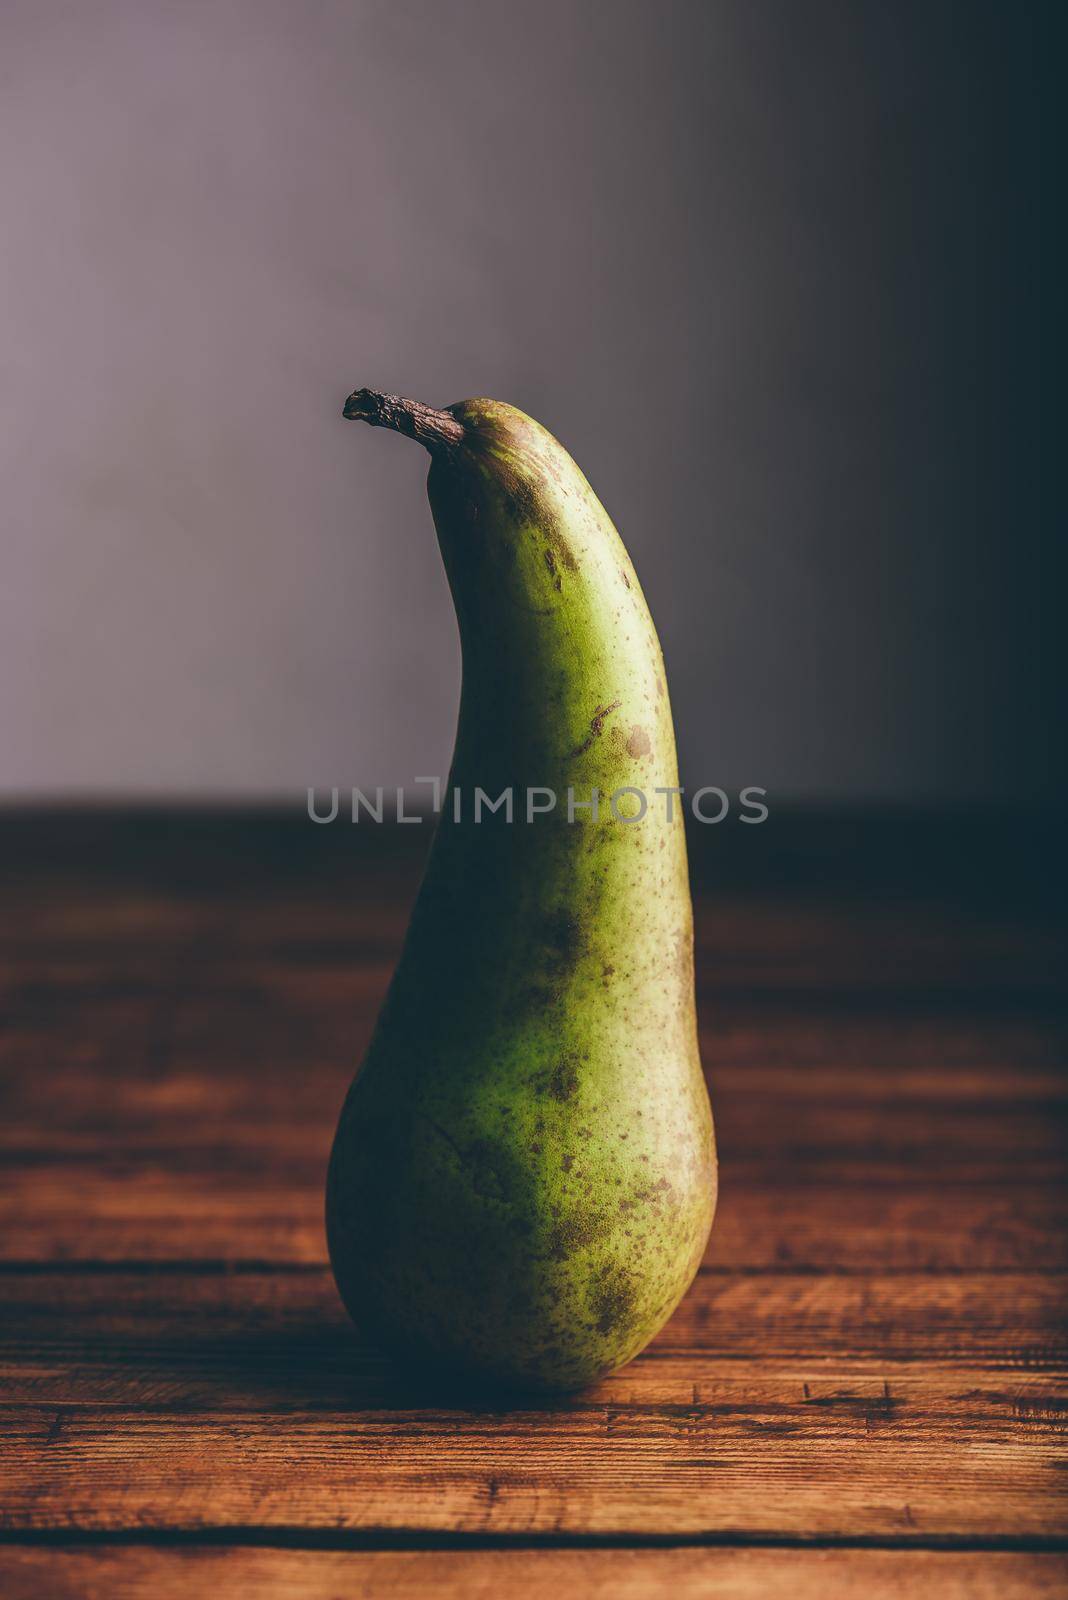 Still Life with Conference Pear on Wooden Tabletop